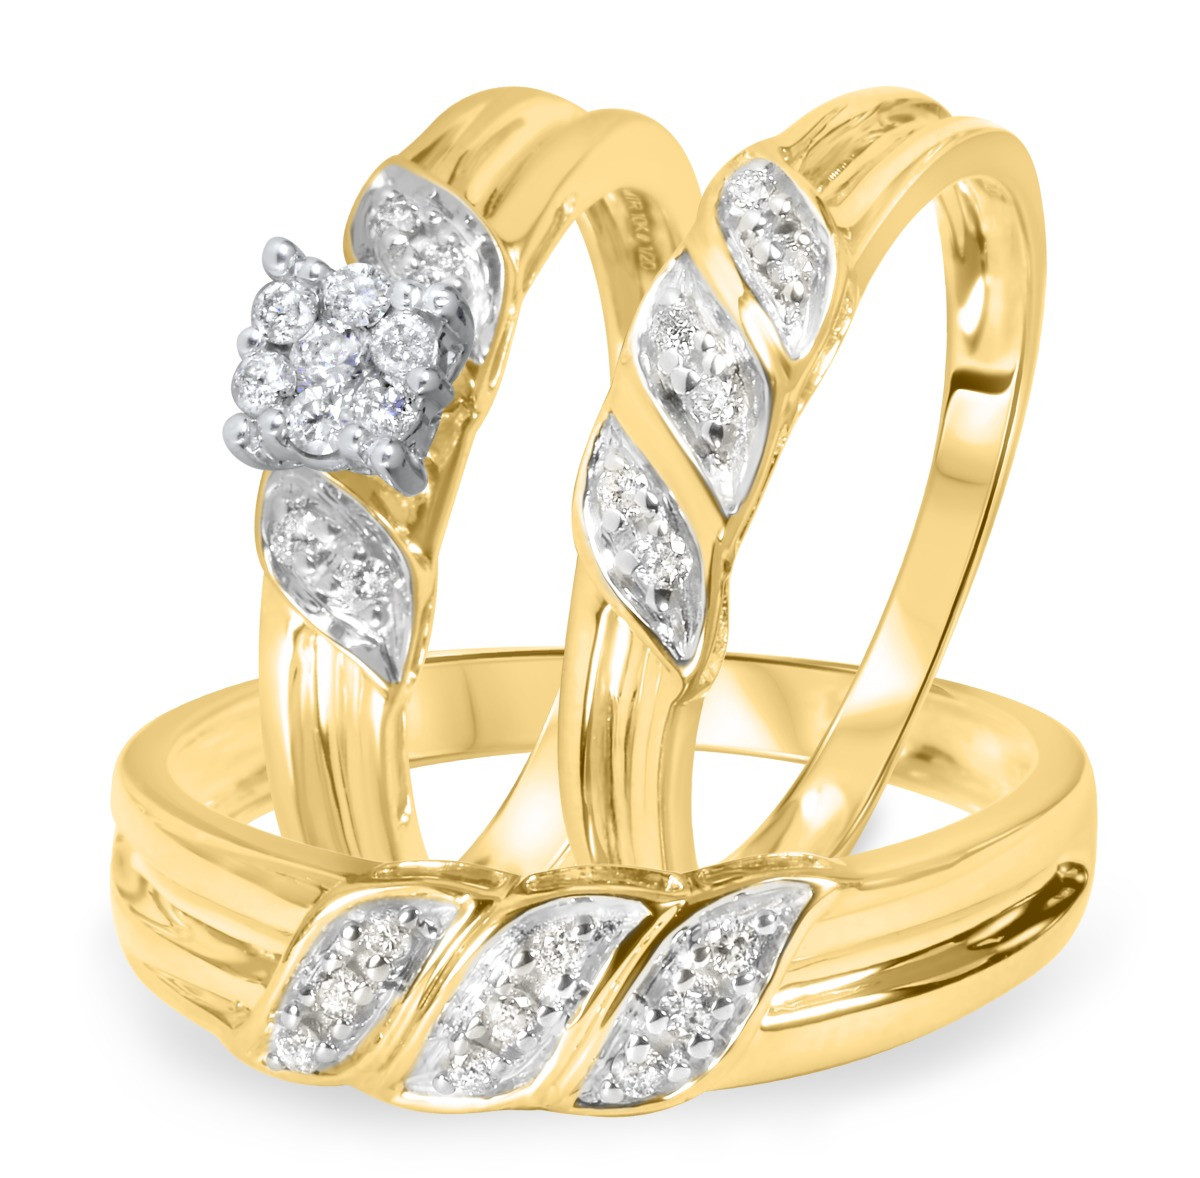 The Best Wedding Ring Trio Sets Home, Family, Style and Art Ideas